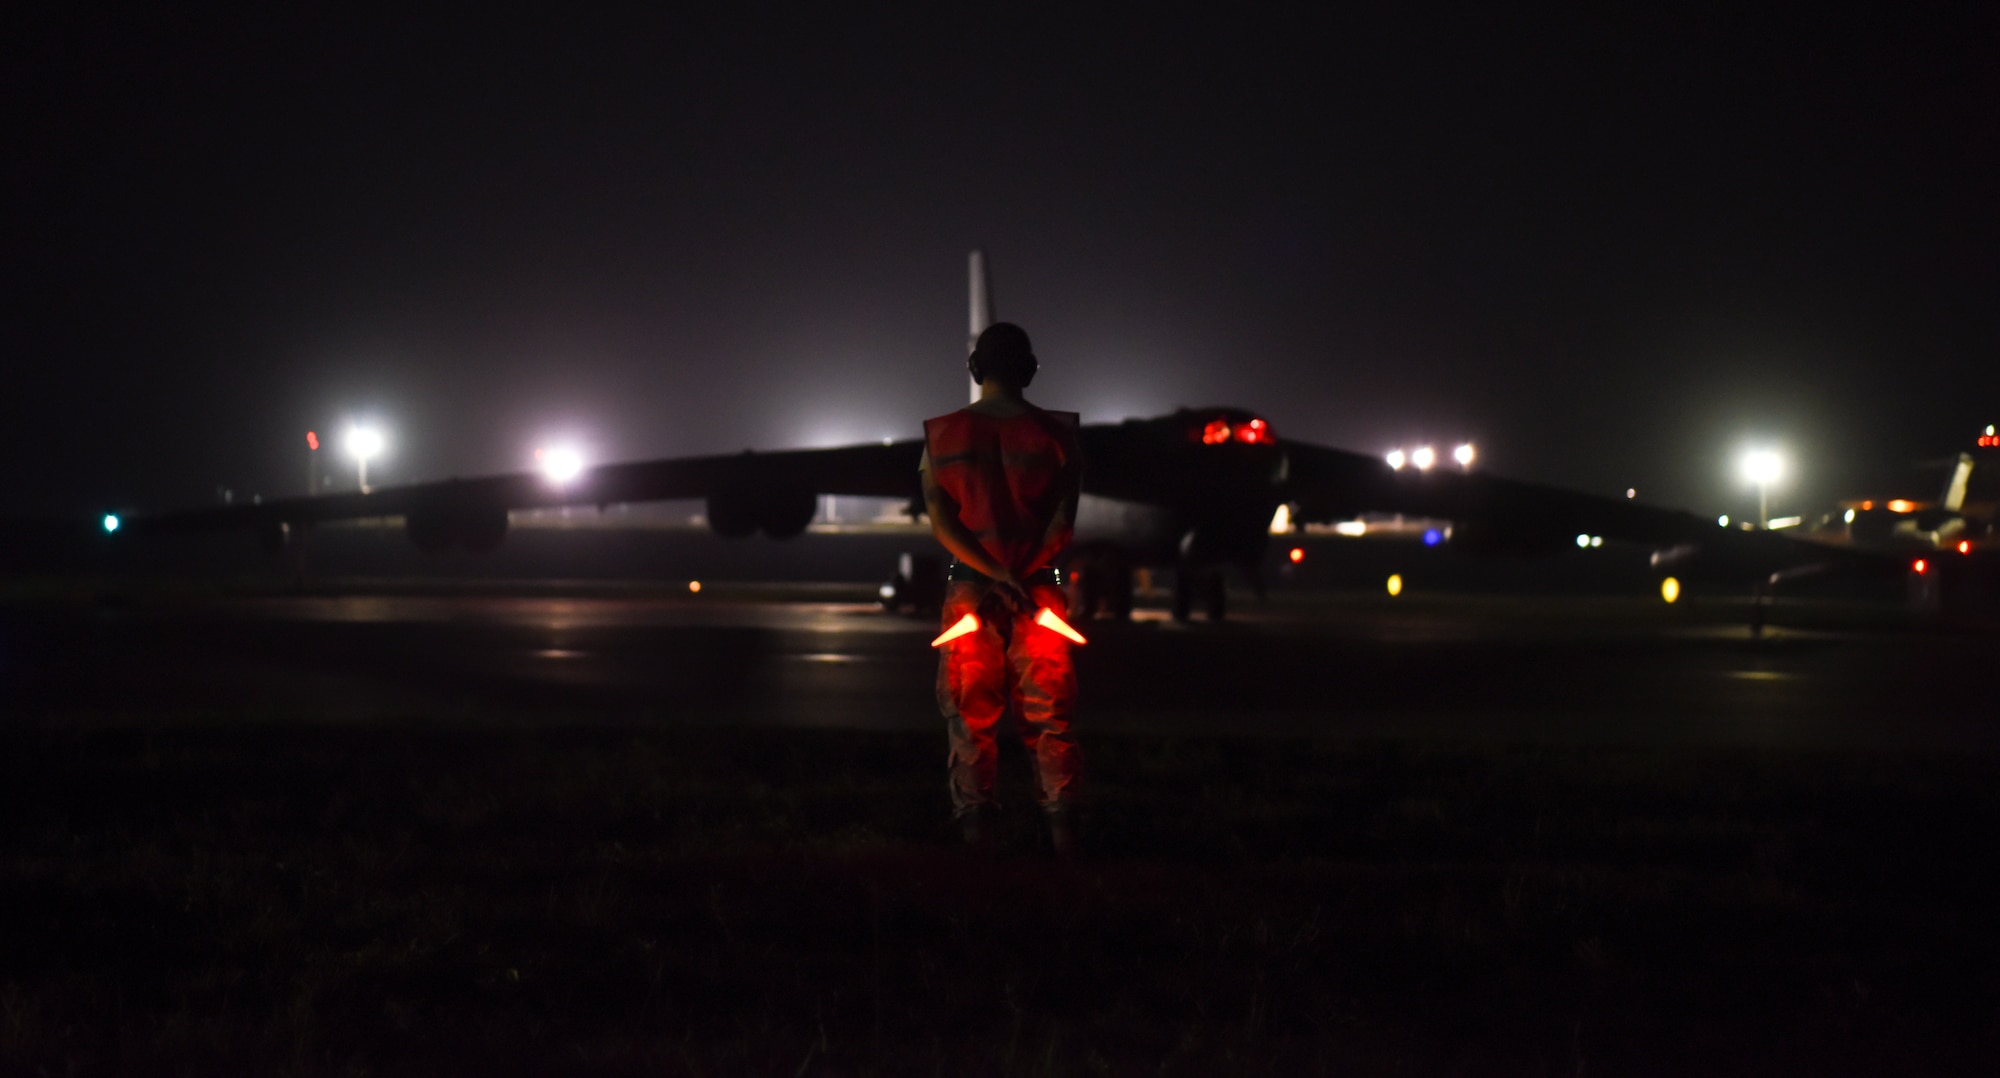 Senior Airman Patrick Cervoni, 69th Aircraft Maintenance Squadron crew chief, prepares to marshal a 69th Expeditionary Bomb Squadron B-52 Stratofortress  on the flightline on Andersen Air Force Base, Guam, Aug. 7, 2019.